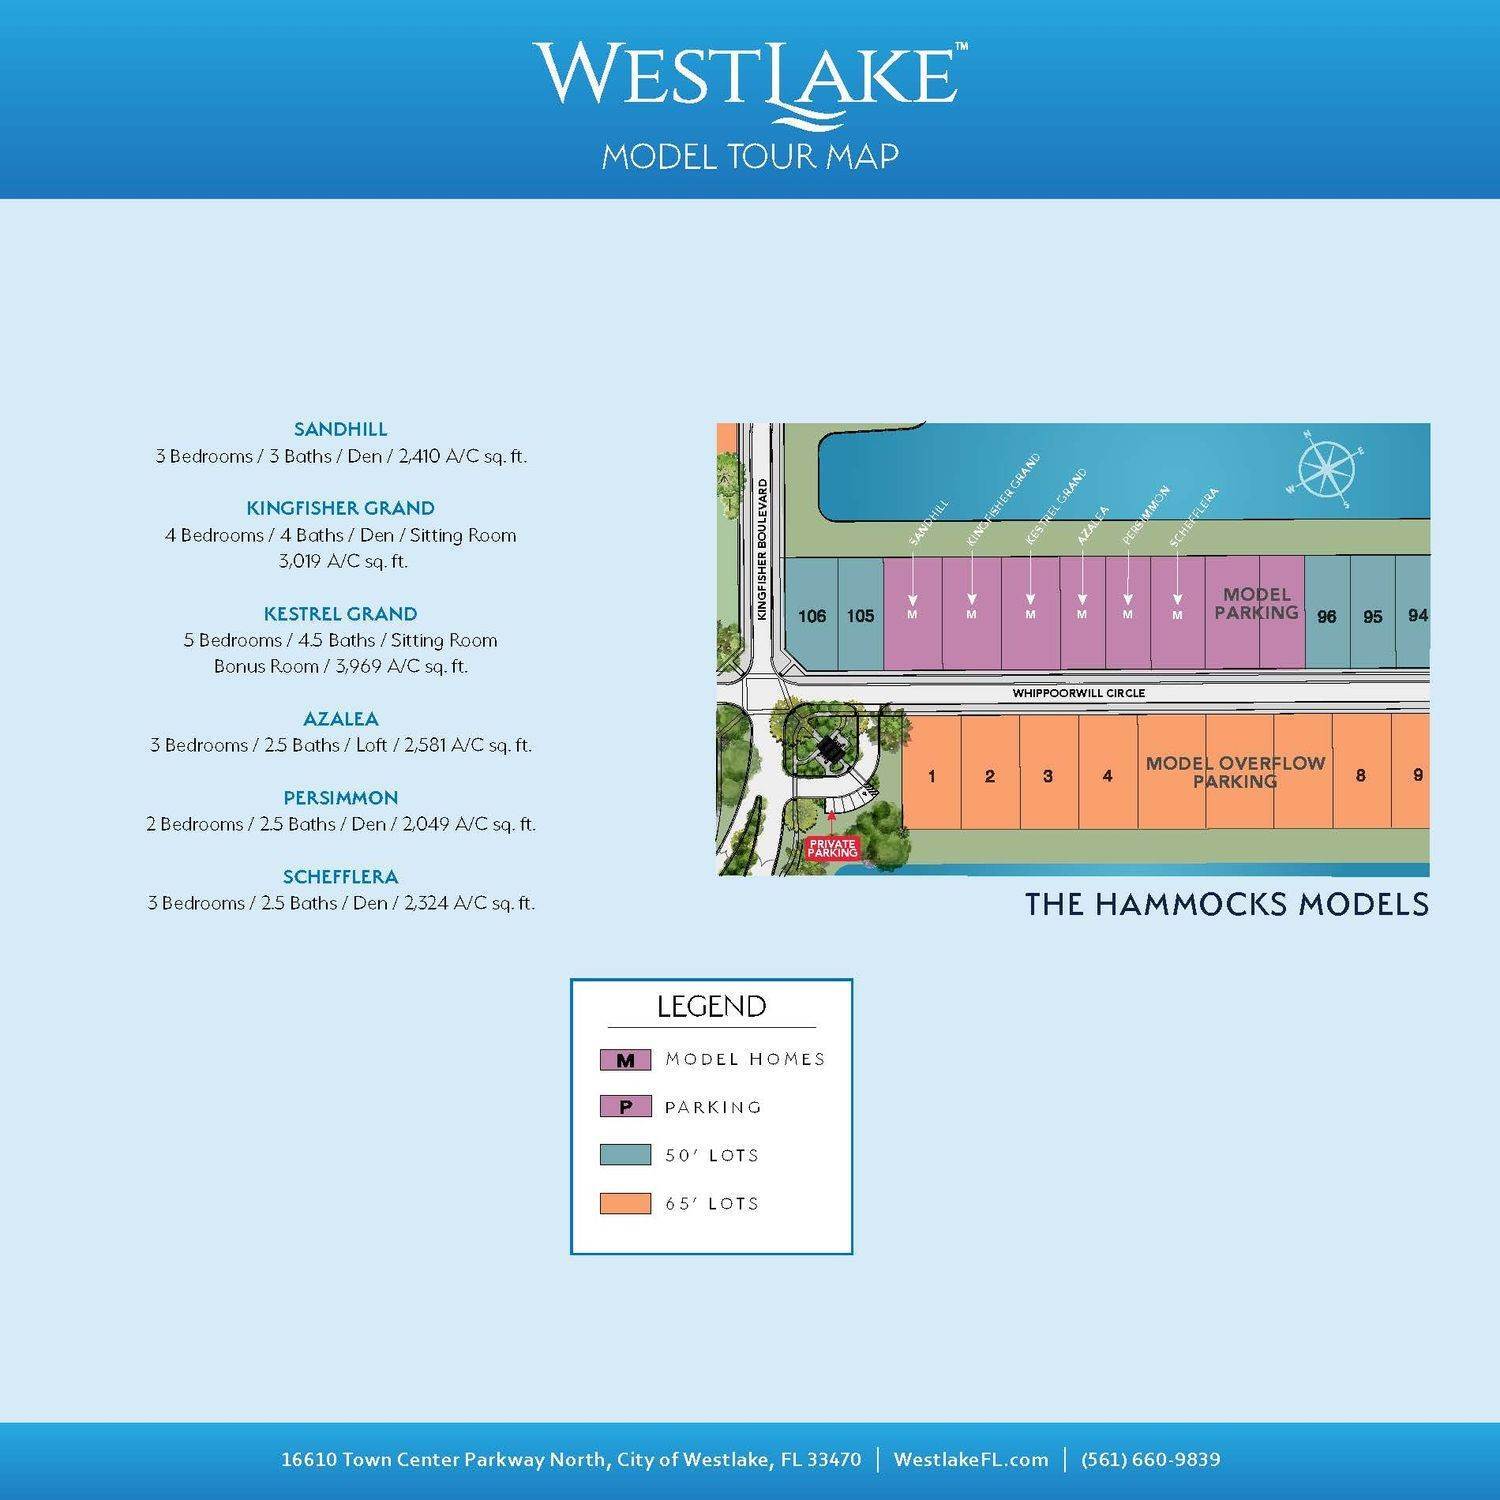 4. Westlake xây dựng tại 16610 Town Center Parkway North, Loxahatchee, FL 33470